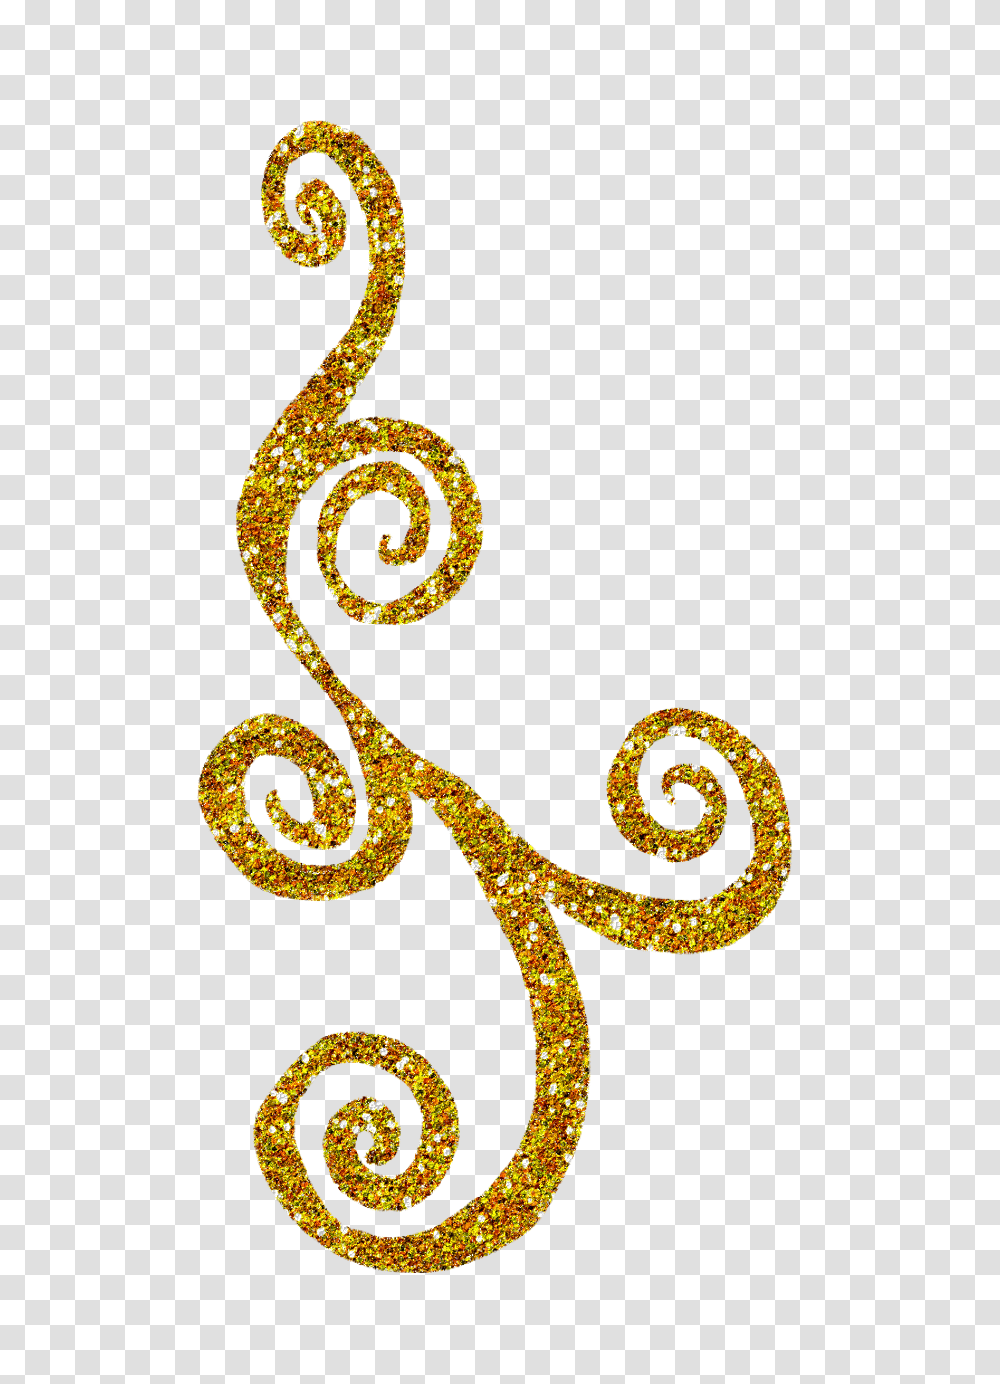 Library Of Silver Glittery Crown Picture Gold Glitter Swirls Clipart, Light, Rug Transparent Png